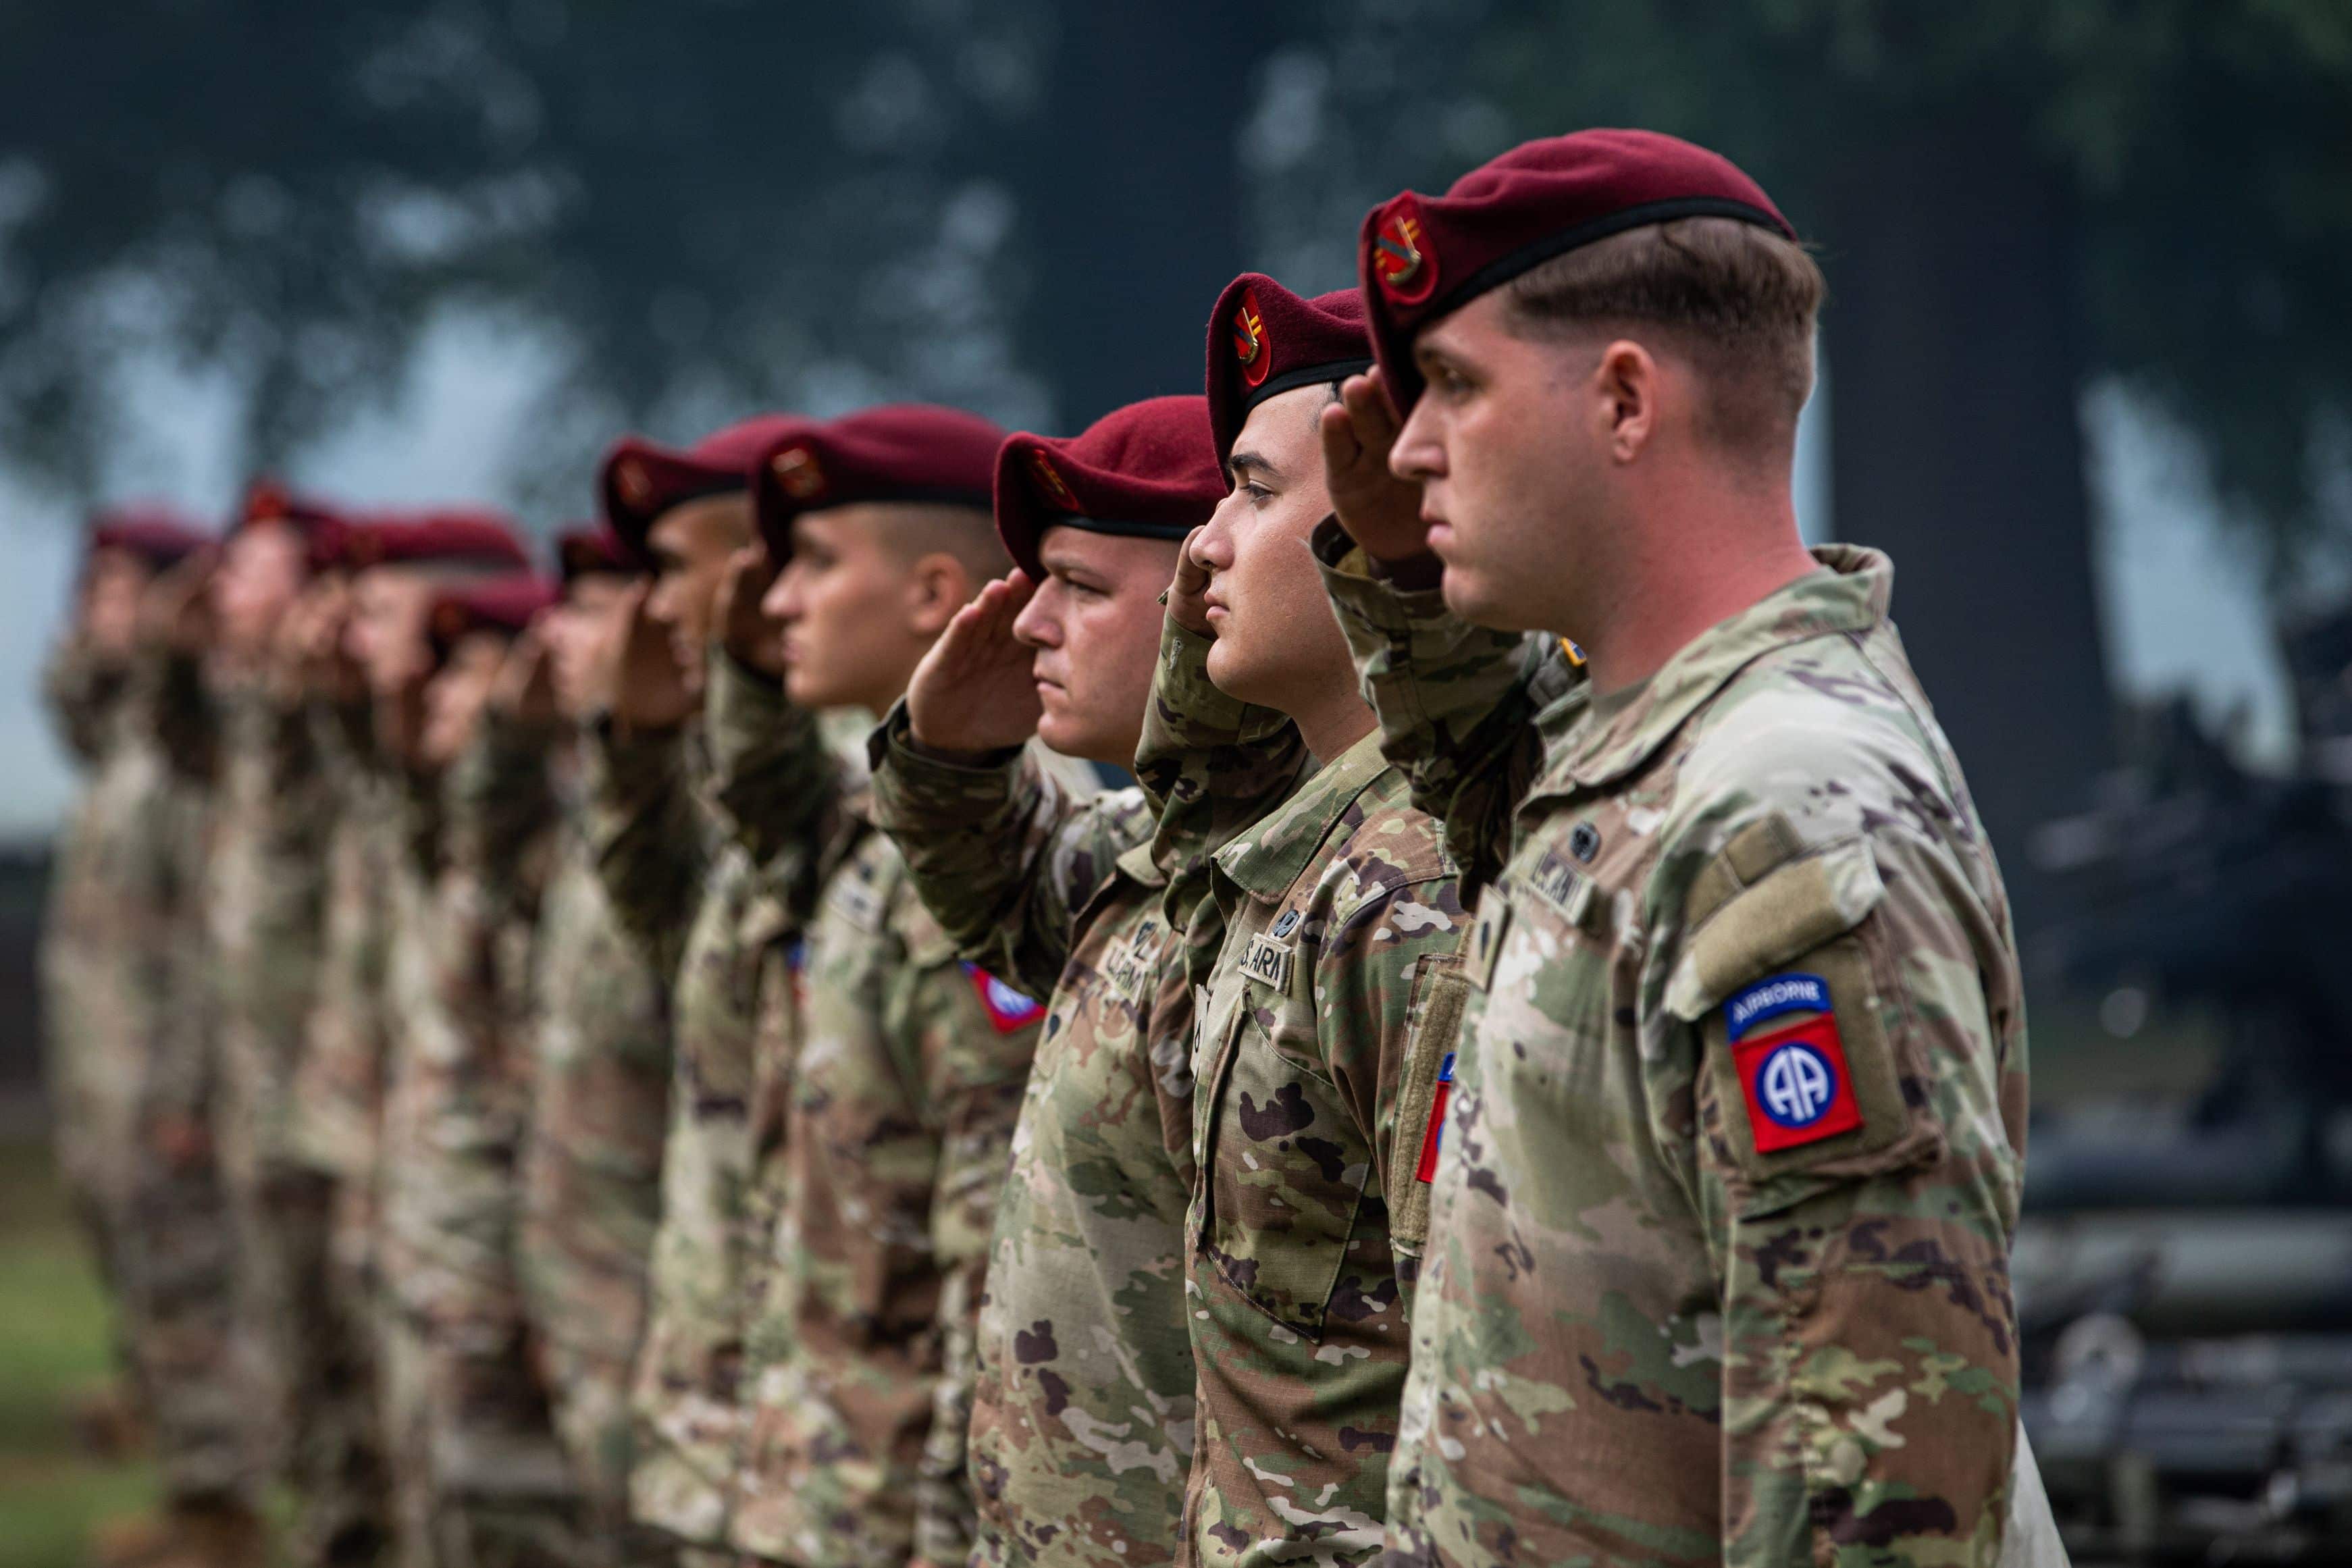 U.S. Army Soldiers, 82nd Airborne Division artillery, salute during the national anthem at the re-designation ceremony, June 2, 2023, at Fort Liberty, N.C.. Fort Liberty's top priority is honoring the people who served, and unites all of what former Fort Bragg stands for. (U.S. Army photo by Spc. Osvaldo Fuentes)